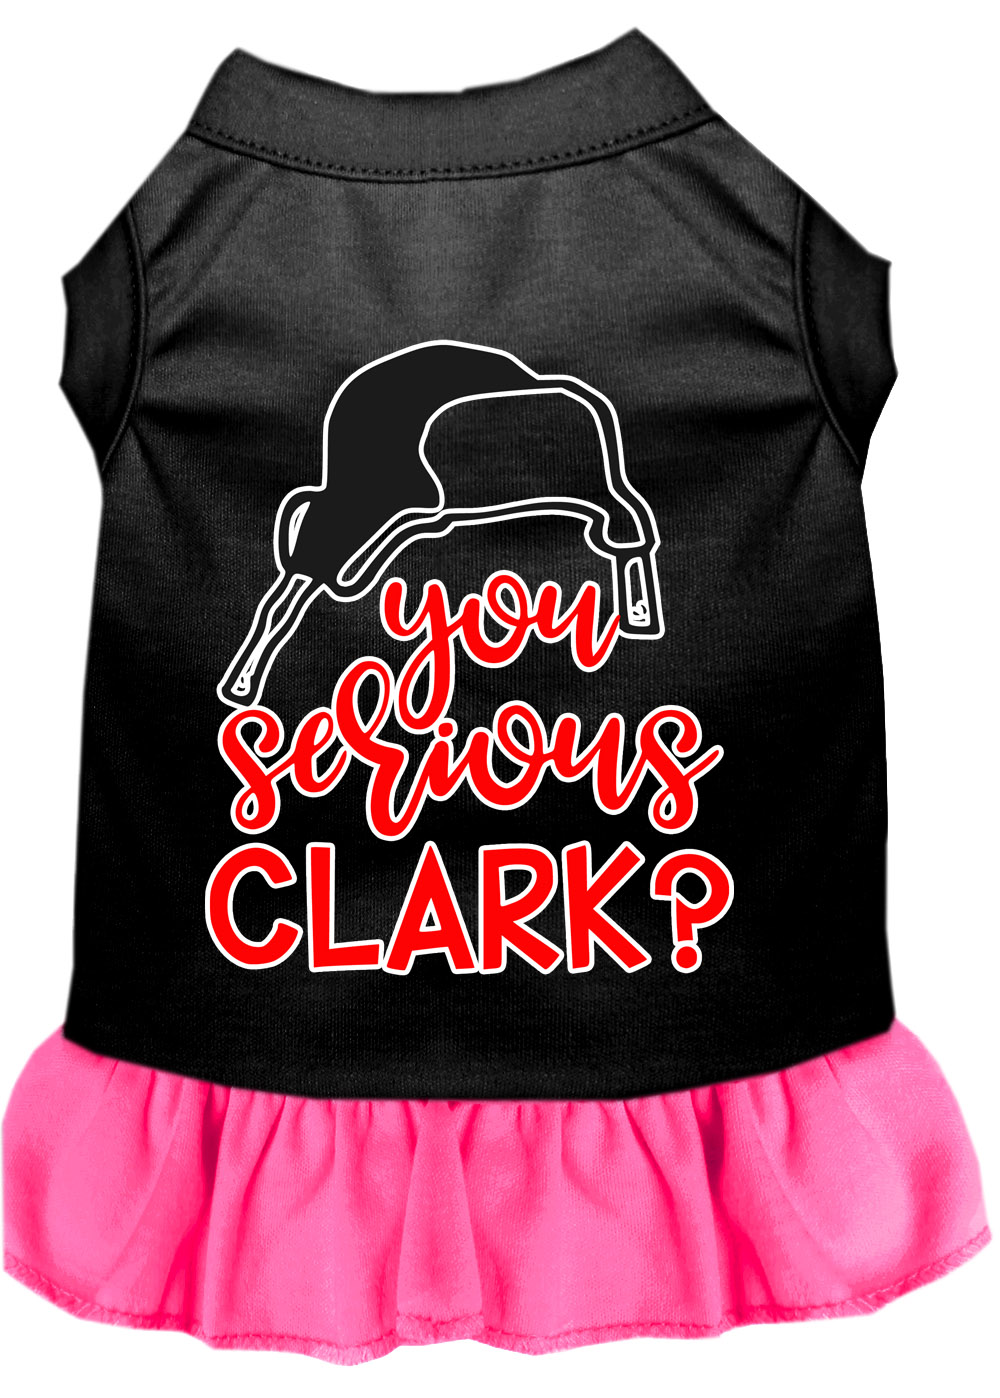 You Serious Clark? Screen Print Dog Dress Black with Bright Pink XXL